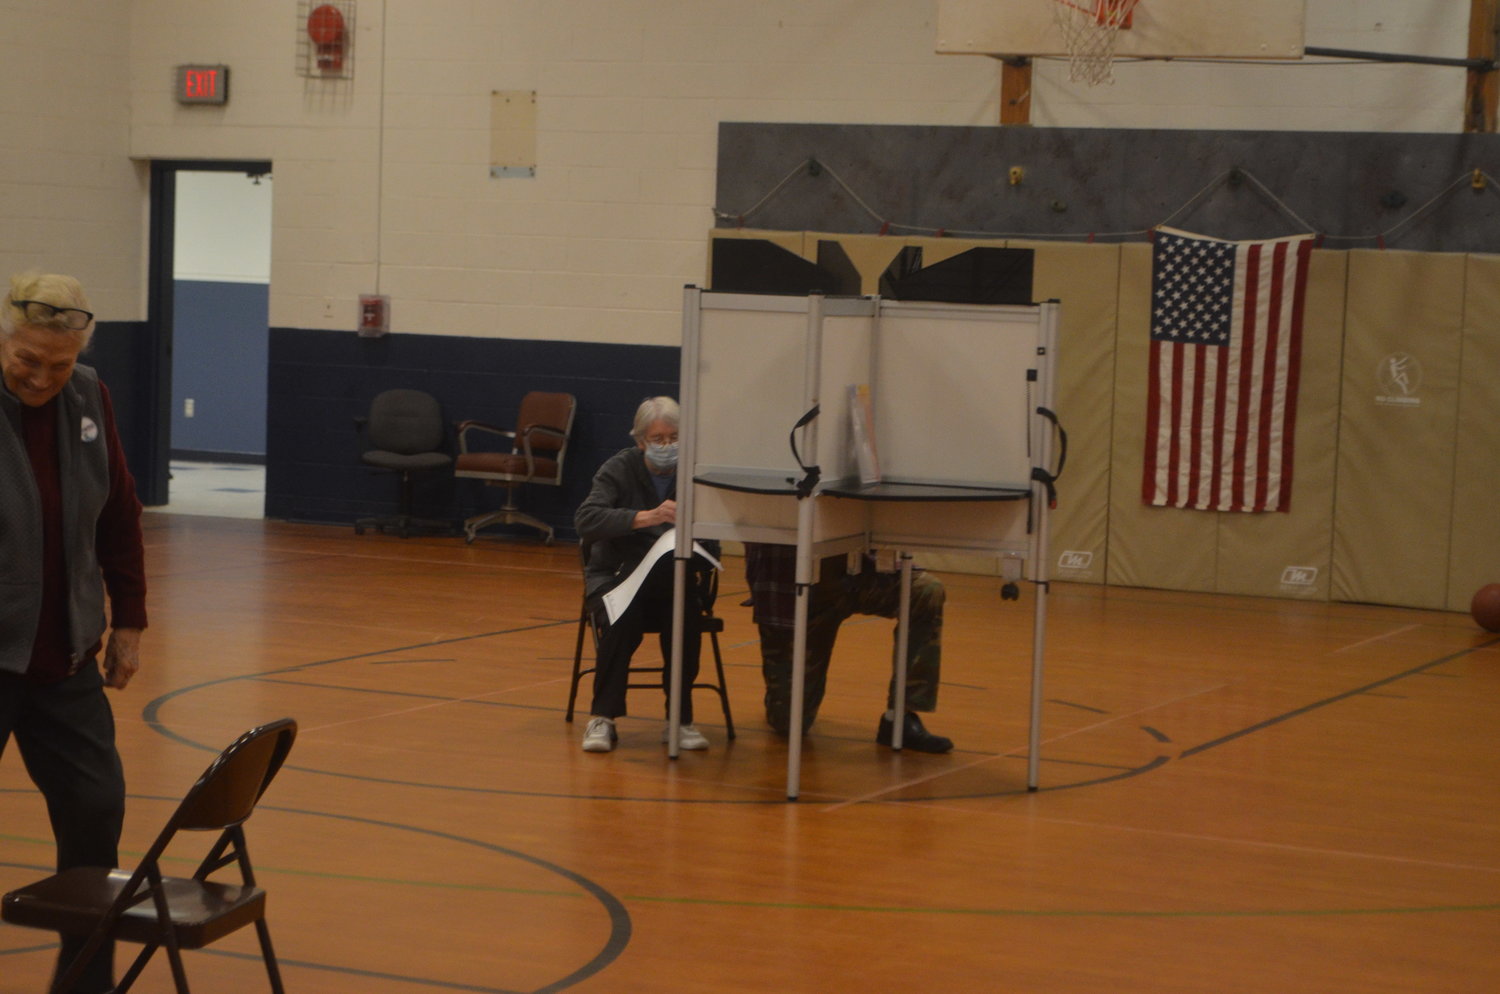 Voters in the polling booth at the Duggan Community Center in Bethel.